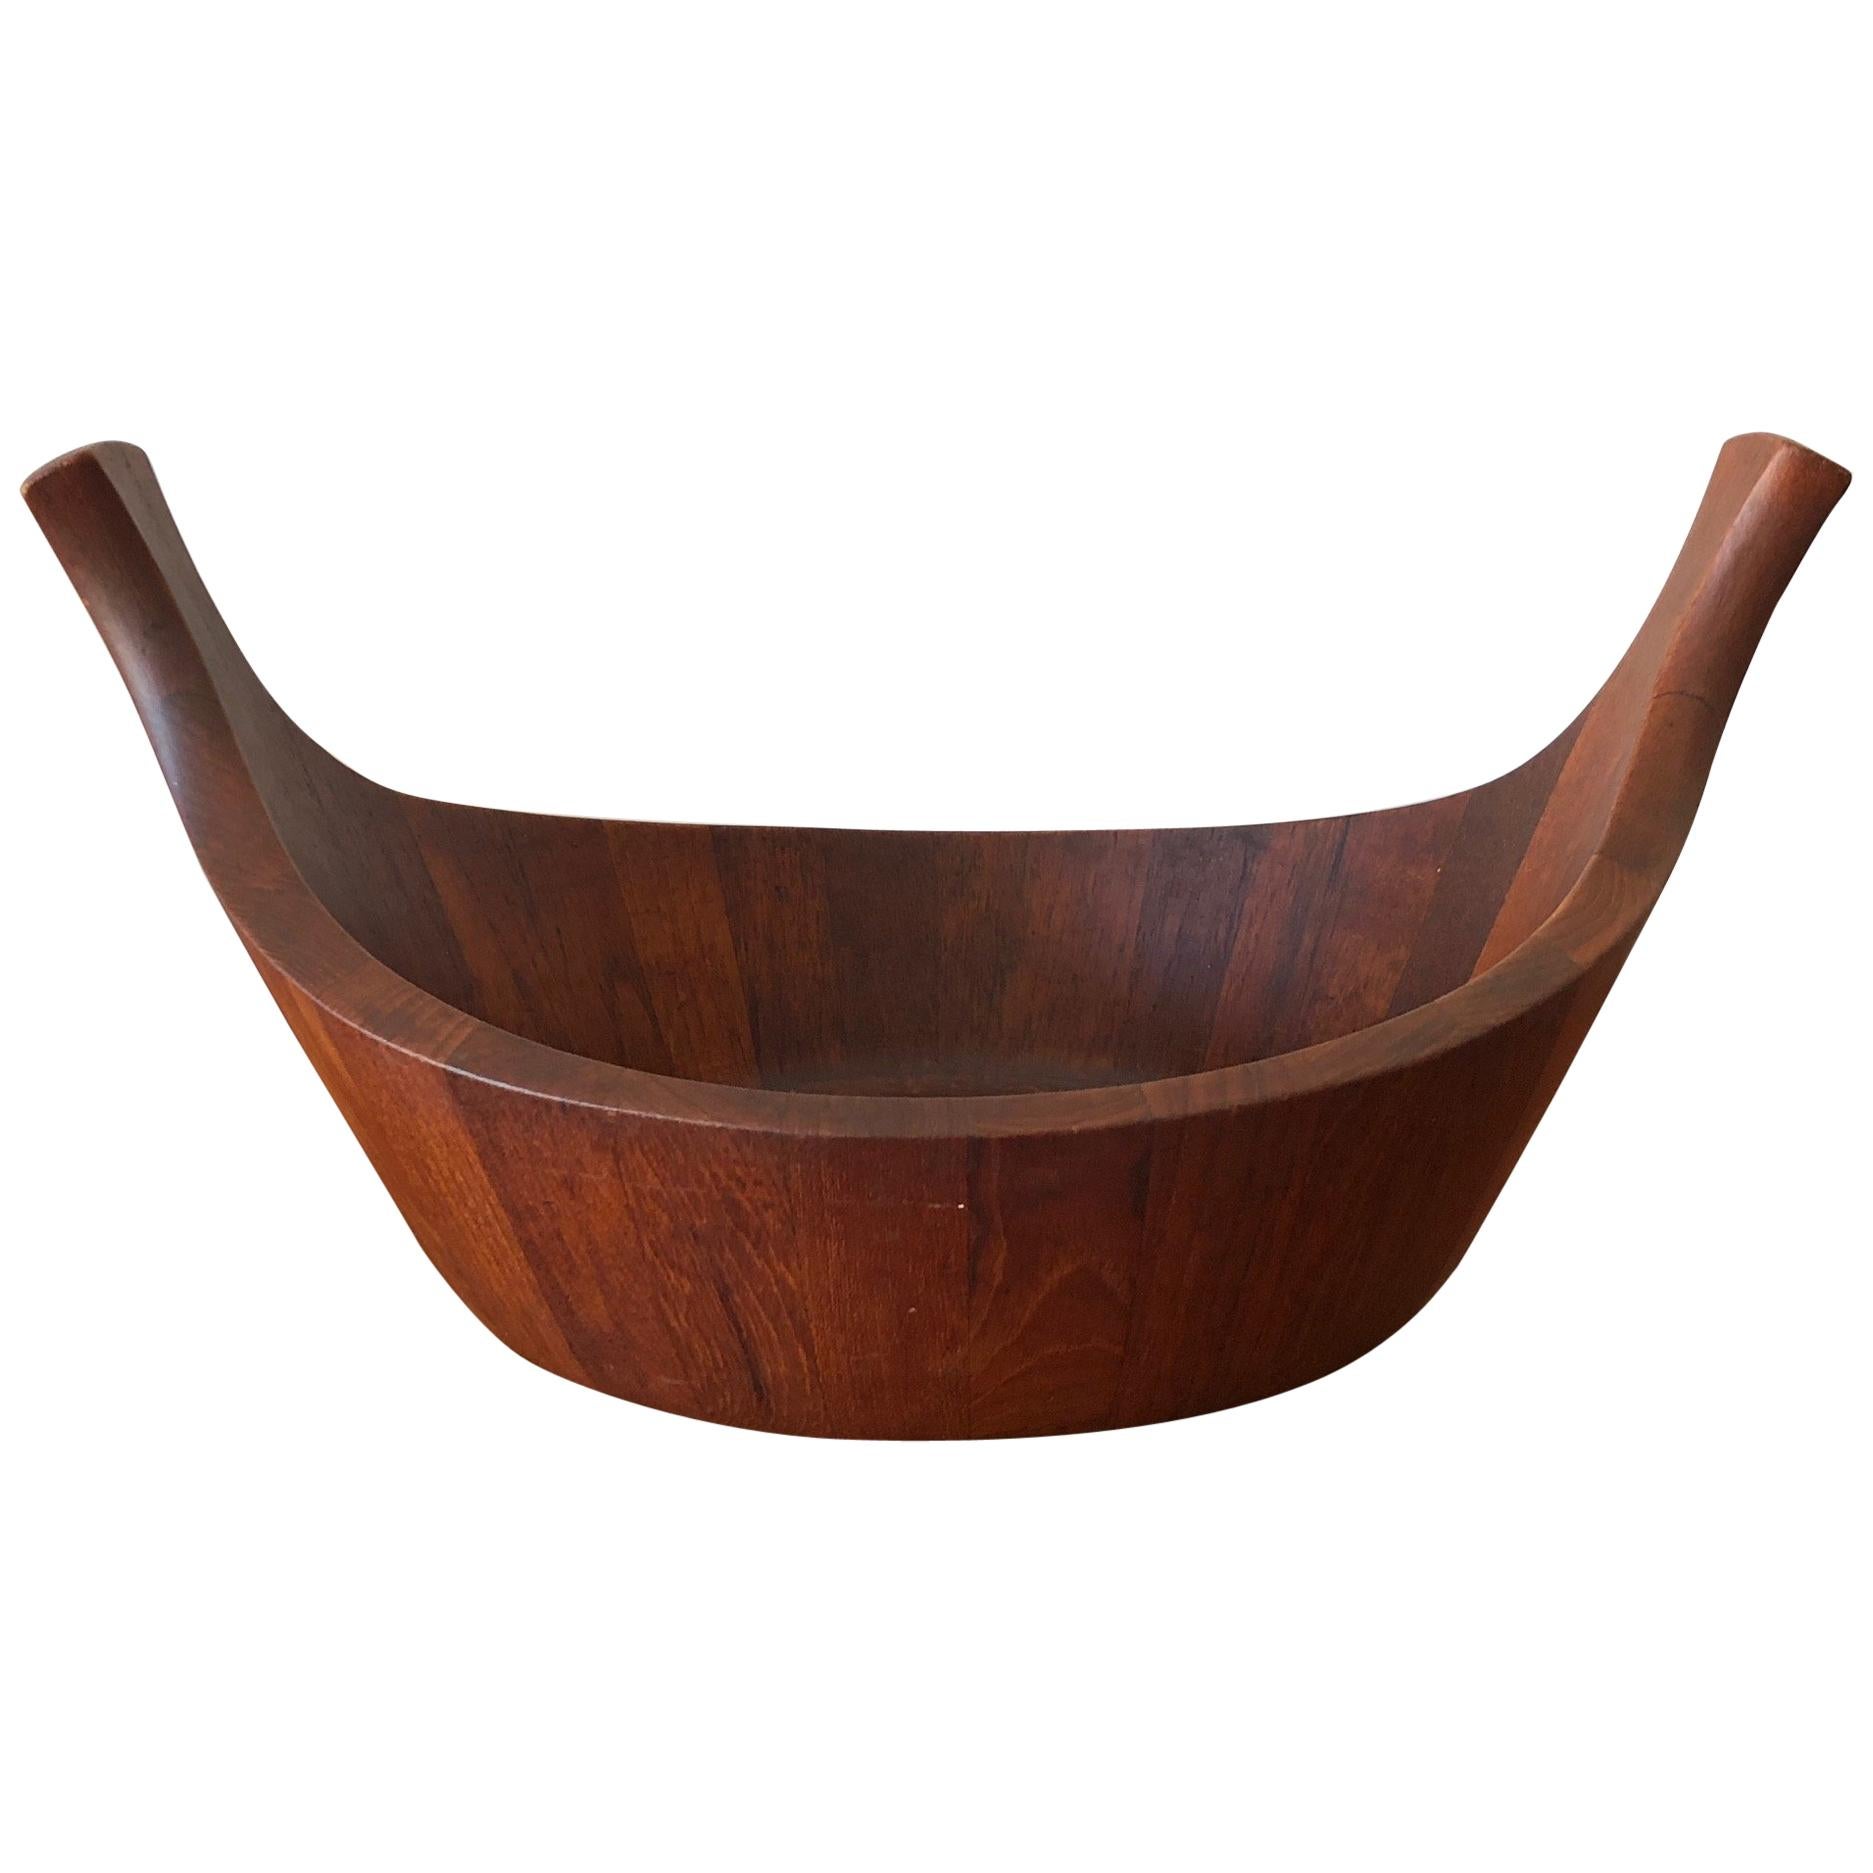 Early Staved Teak Bowl by Jens Quistgaard, Denmark